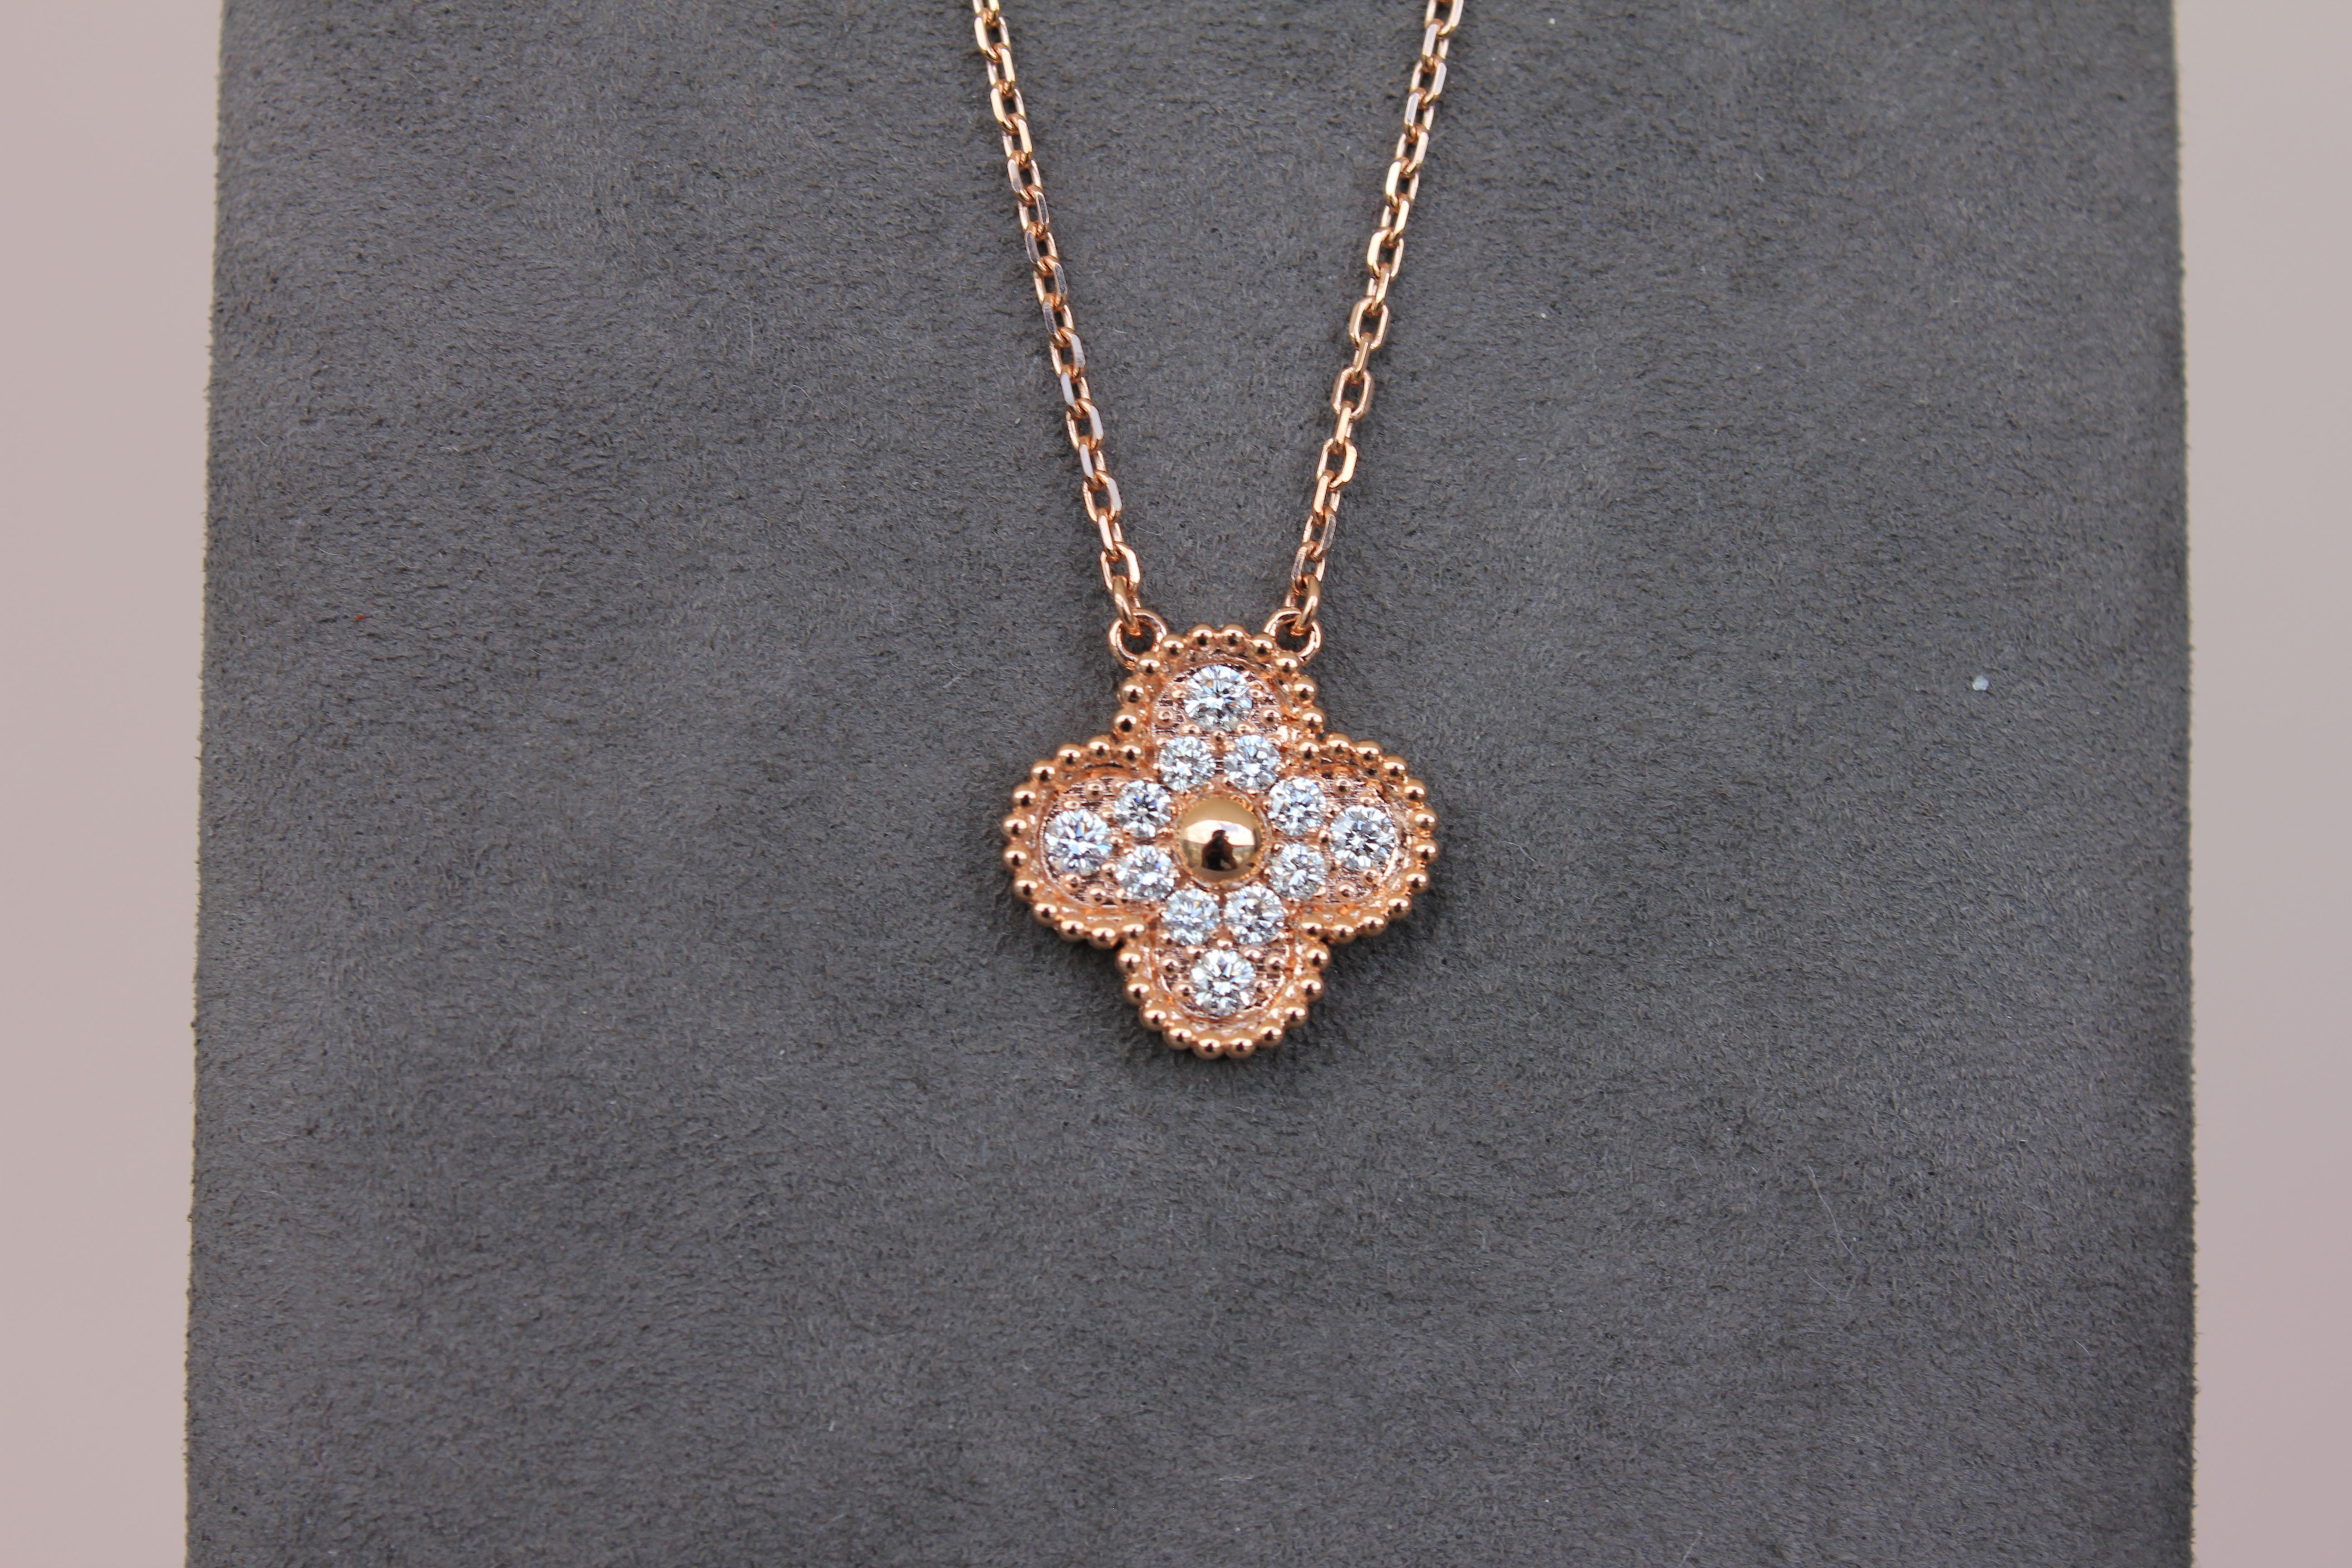 18K Rose Gold AU 750 
Diamond Pave Motifs - Around 1.00 Carat Weight EF/VS Quality Grades
The brilliance and sparkle of the diamonds is of the highest level. Please review all photos and video to see how gorgeous it looks. 
Excellent Quality - No